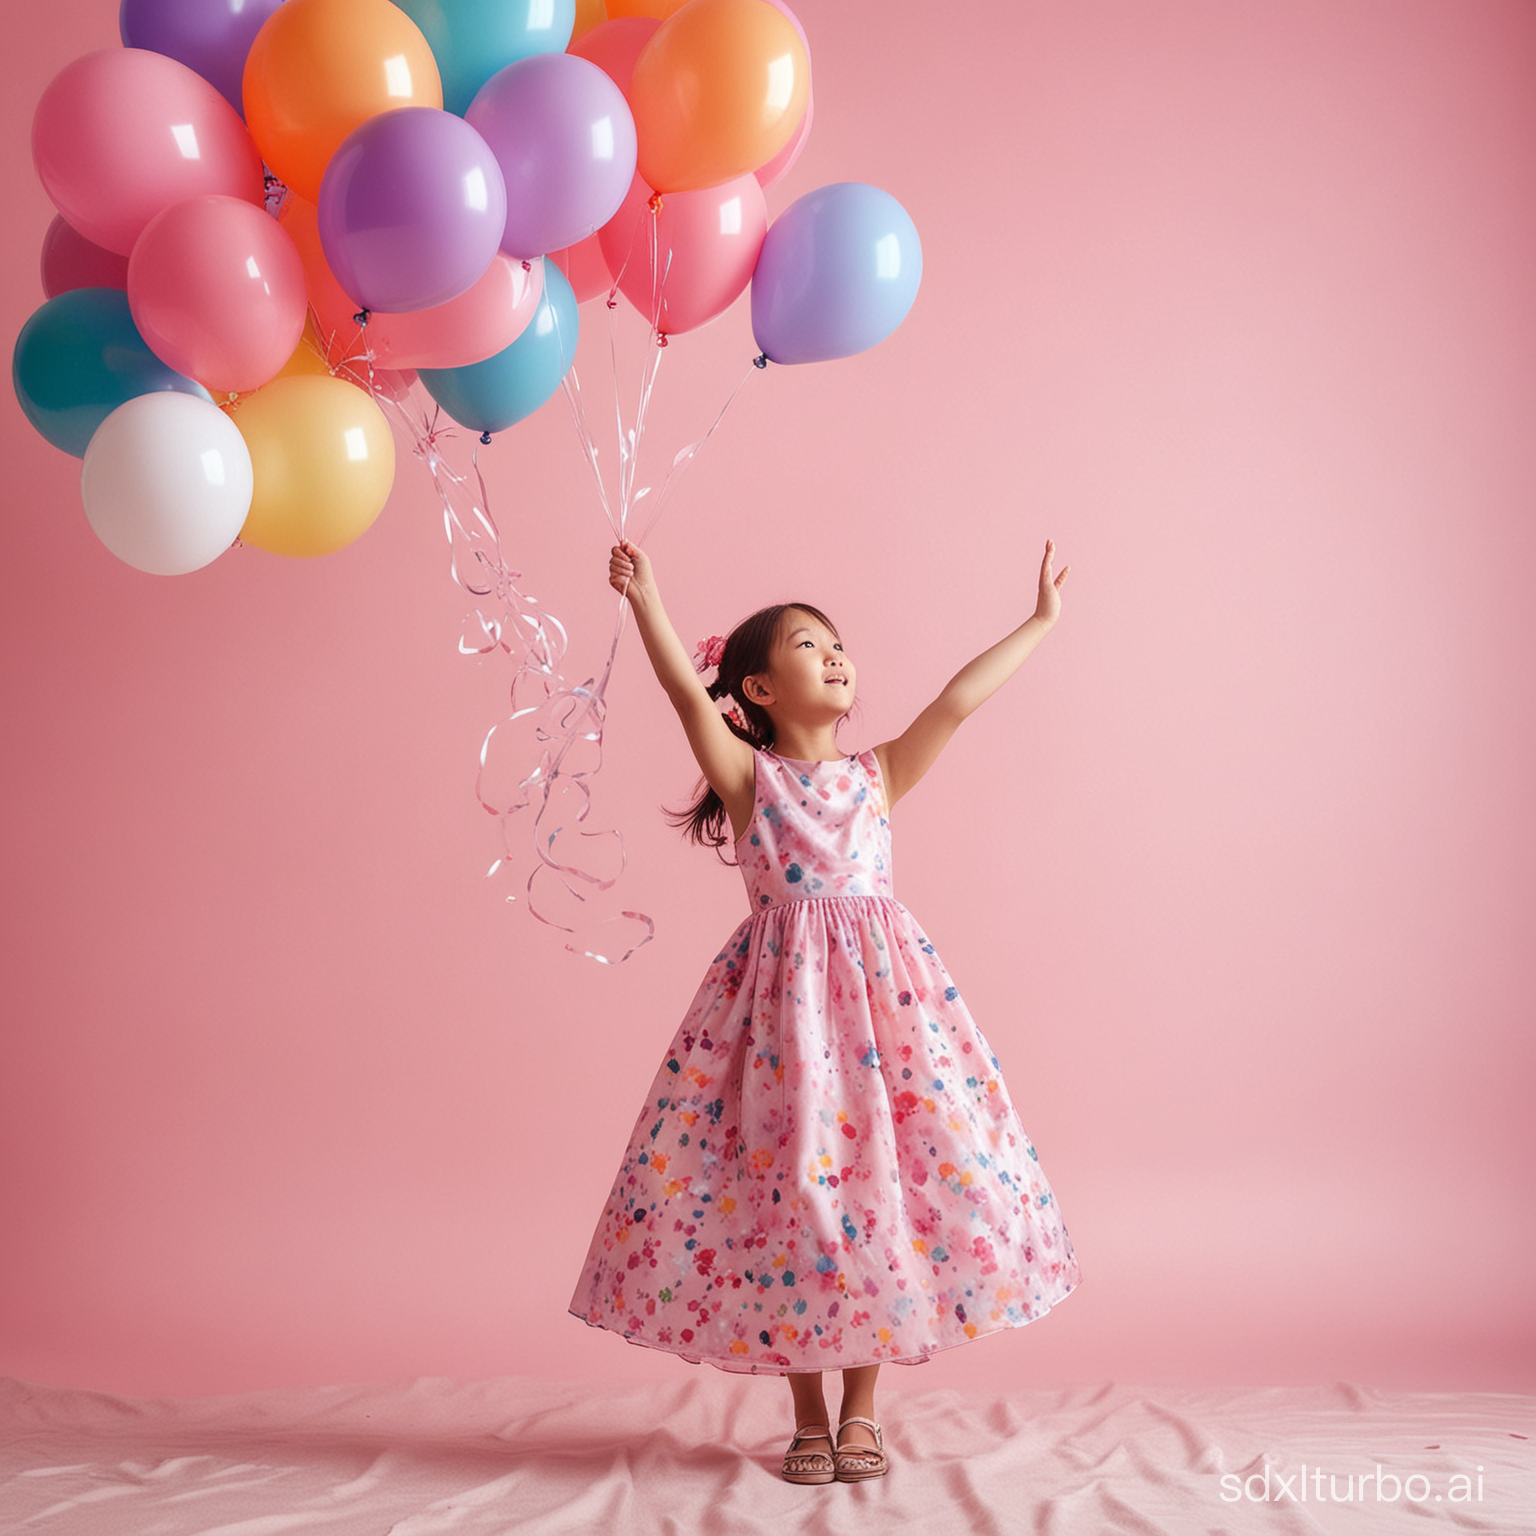 A little Asian girl, 10 years old, wearing a beautiful dress and flying into the air with a bouquet of colorful balloons, with pink clouds in the background, back view, real photography